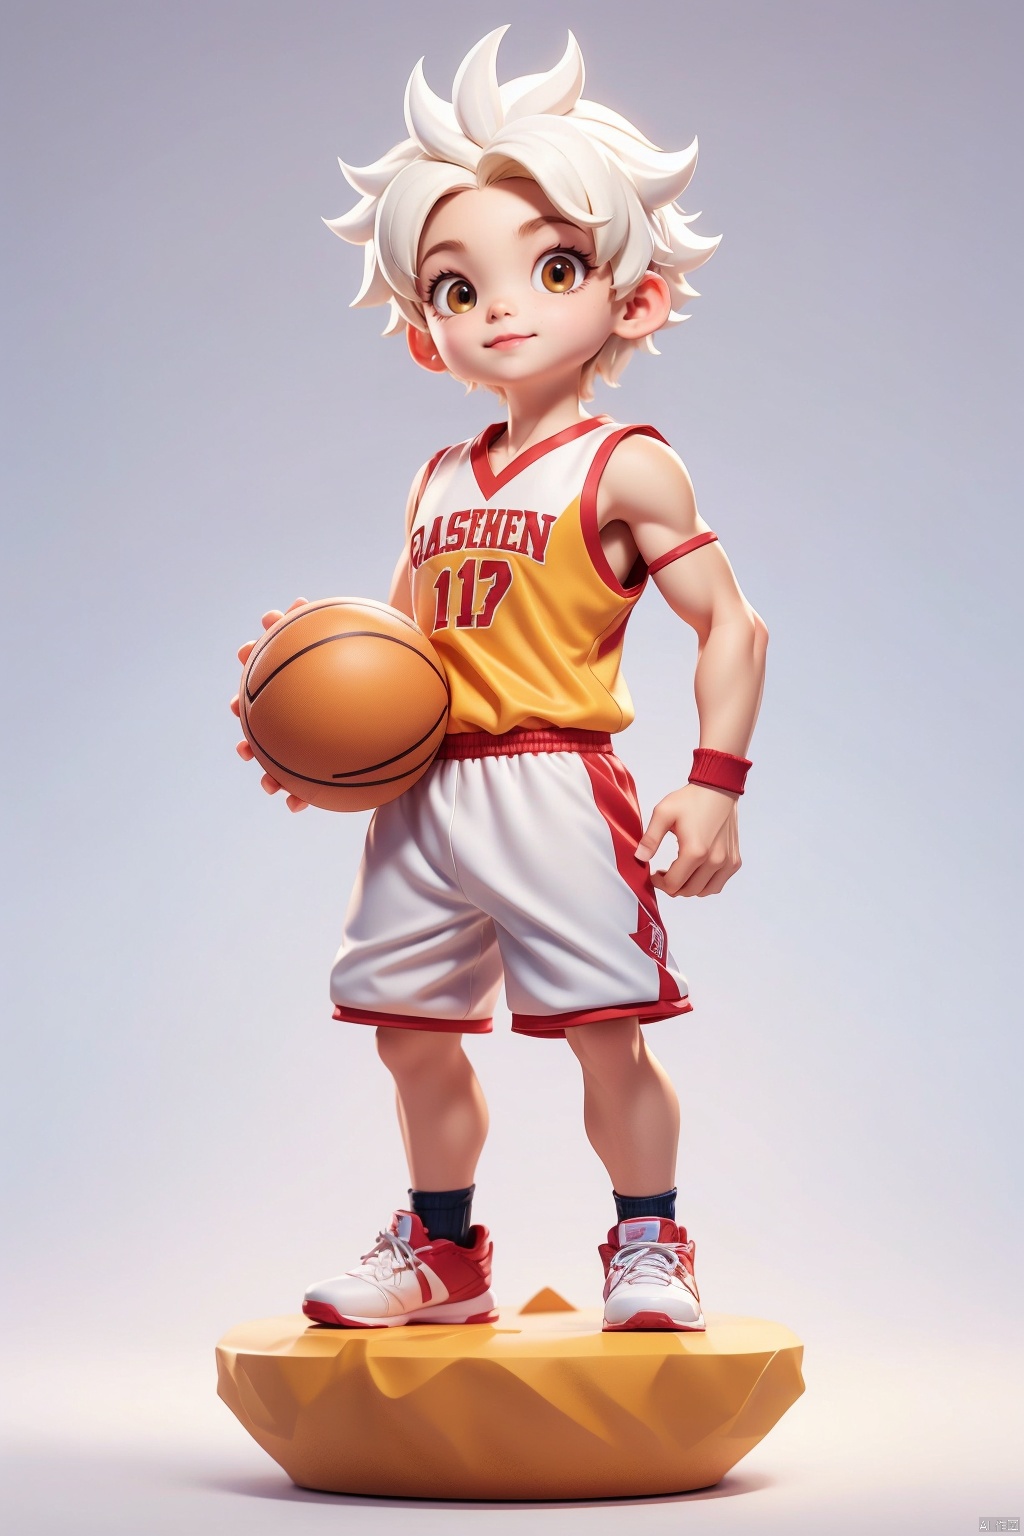 1 male, Sheep IP, solo, (Q version :1.2), firm expression, white hair, blush, basketball uniform, athlete body, simple white background,